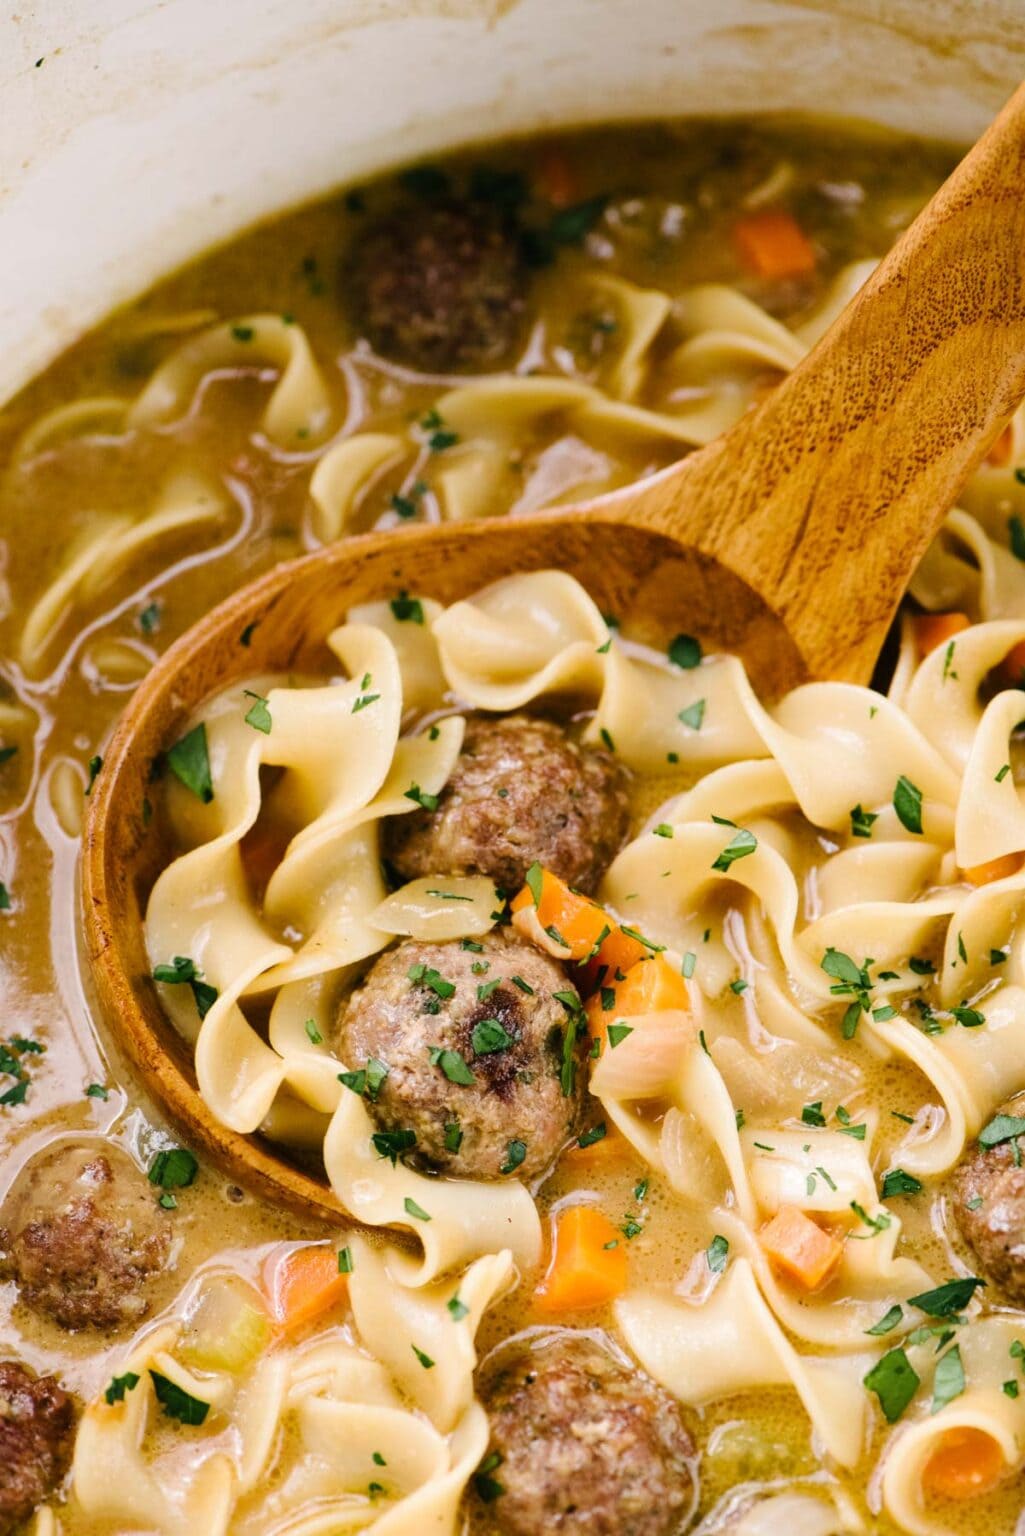 Swedish Meatball Soup (Hearty One Pot Meal!) - Our Salty Kitchen